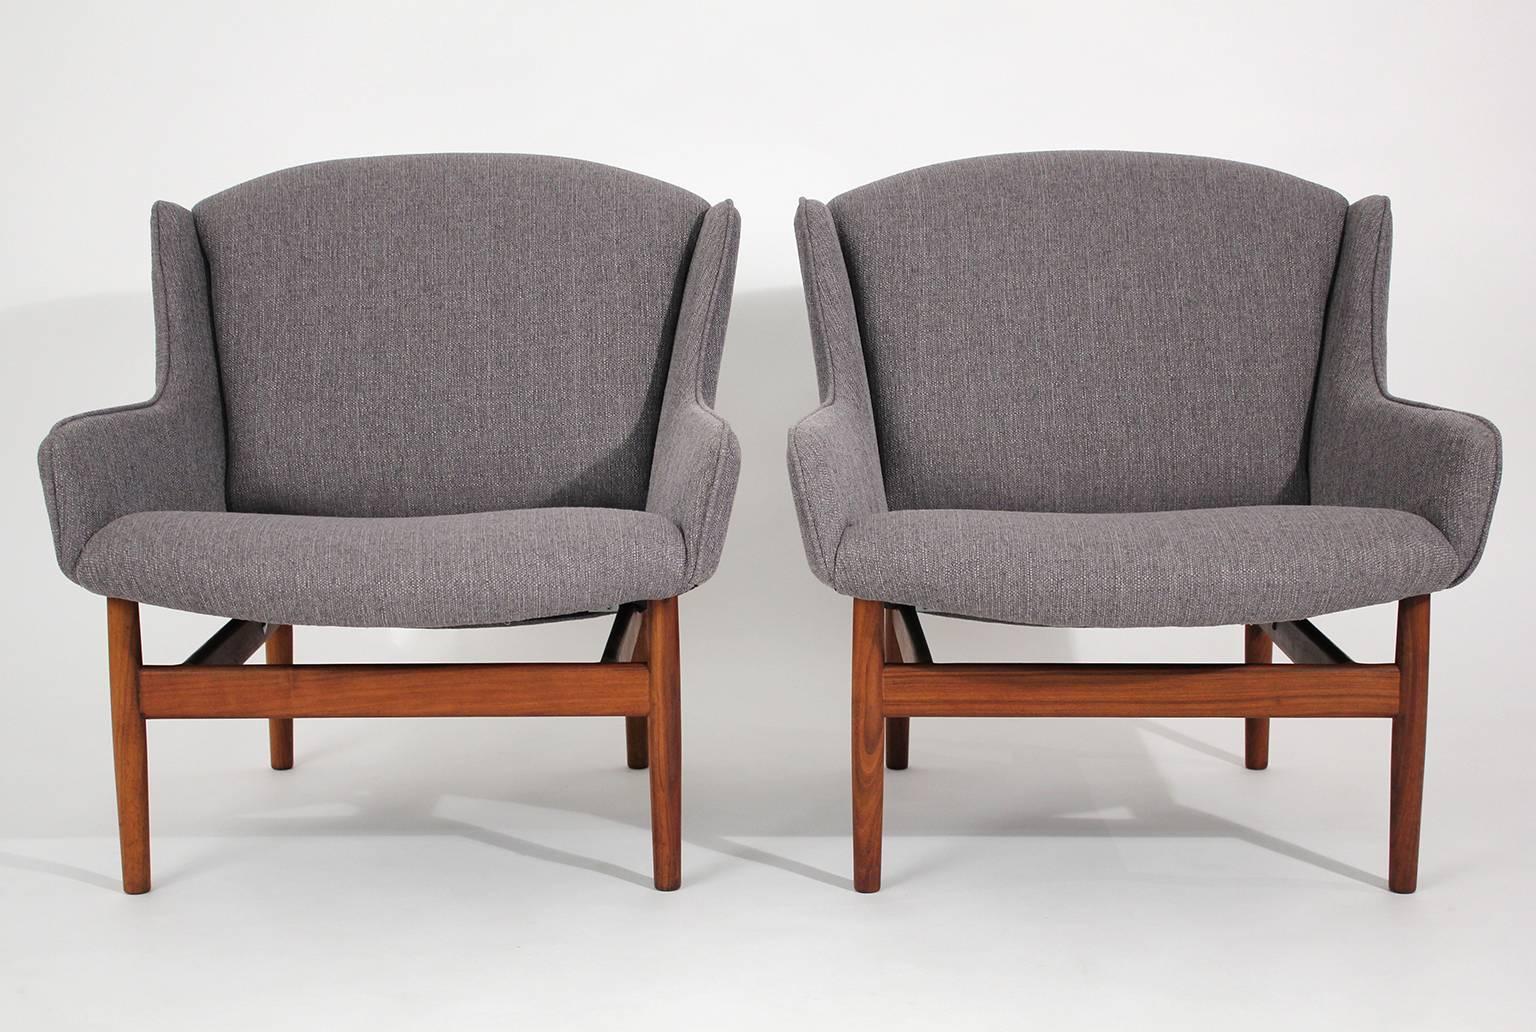 Completely restored Jens Risom designed lounge chairs for Jens Risom Design, Inc. circa 1950s. Pair of chairs have a great modernist design and form. These chairs sit well and are very comfortable. Walnut frames have been restored and thy have new